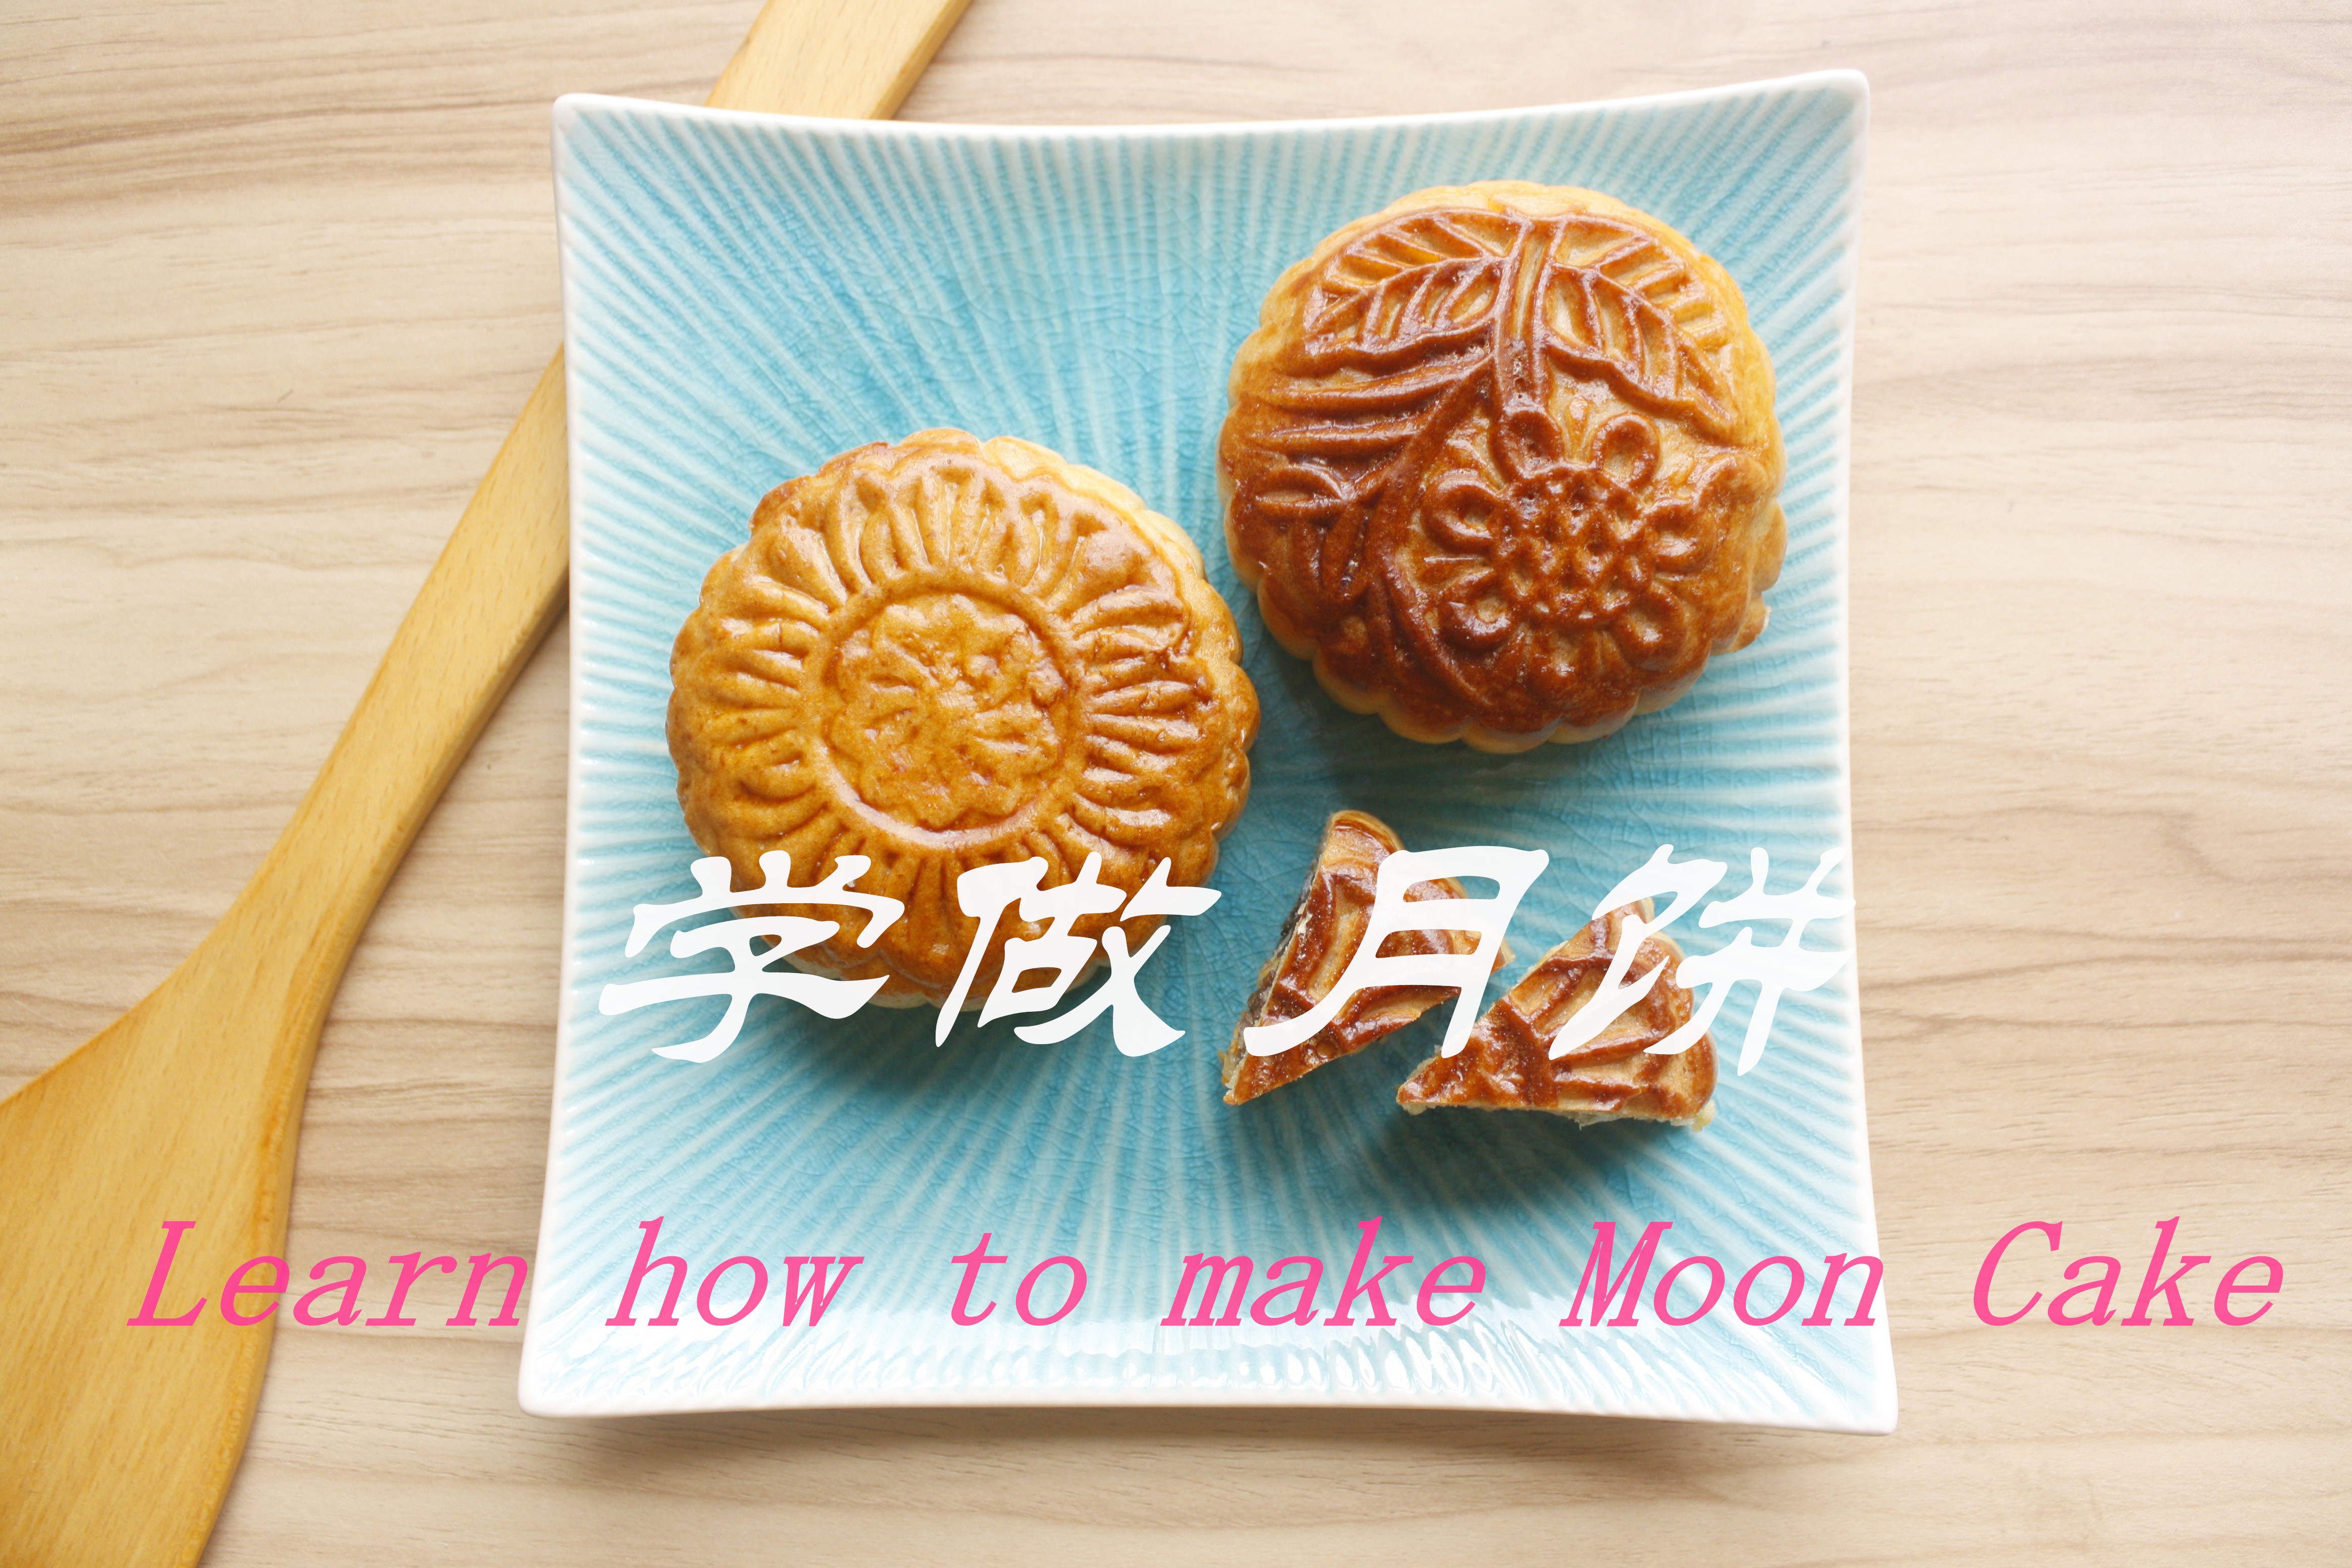 Learn how to make Moon Cakes